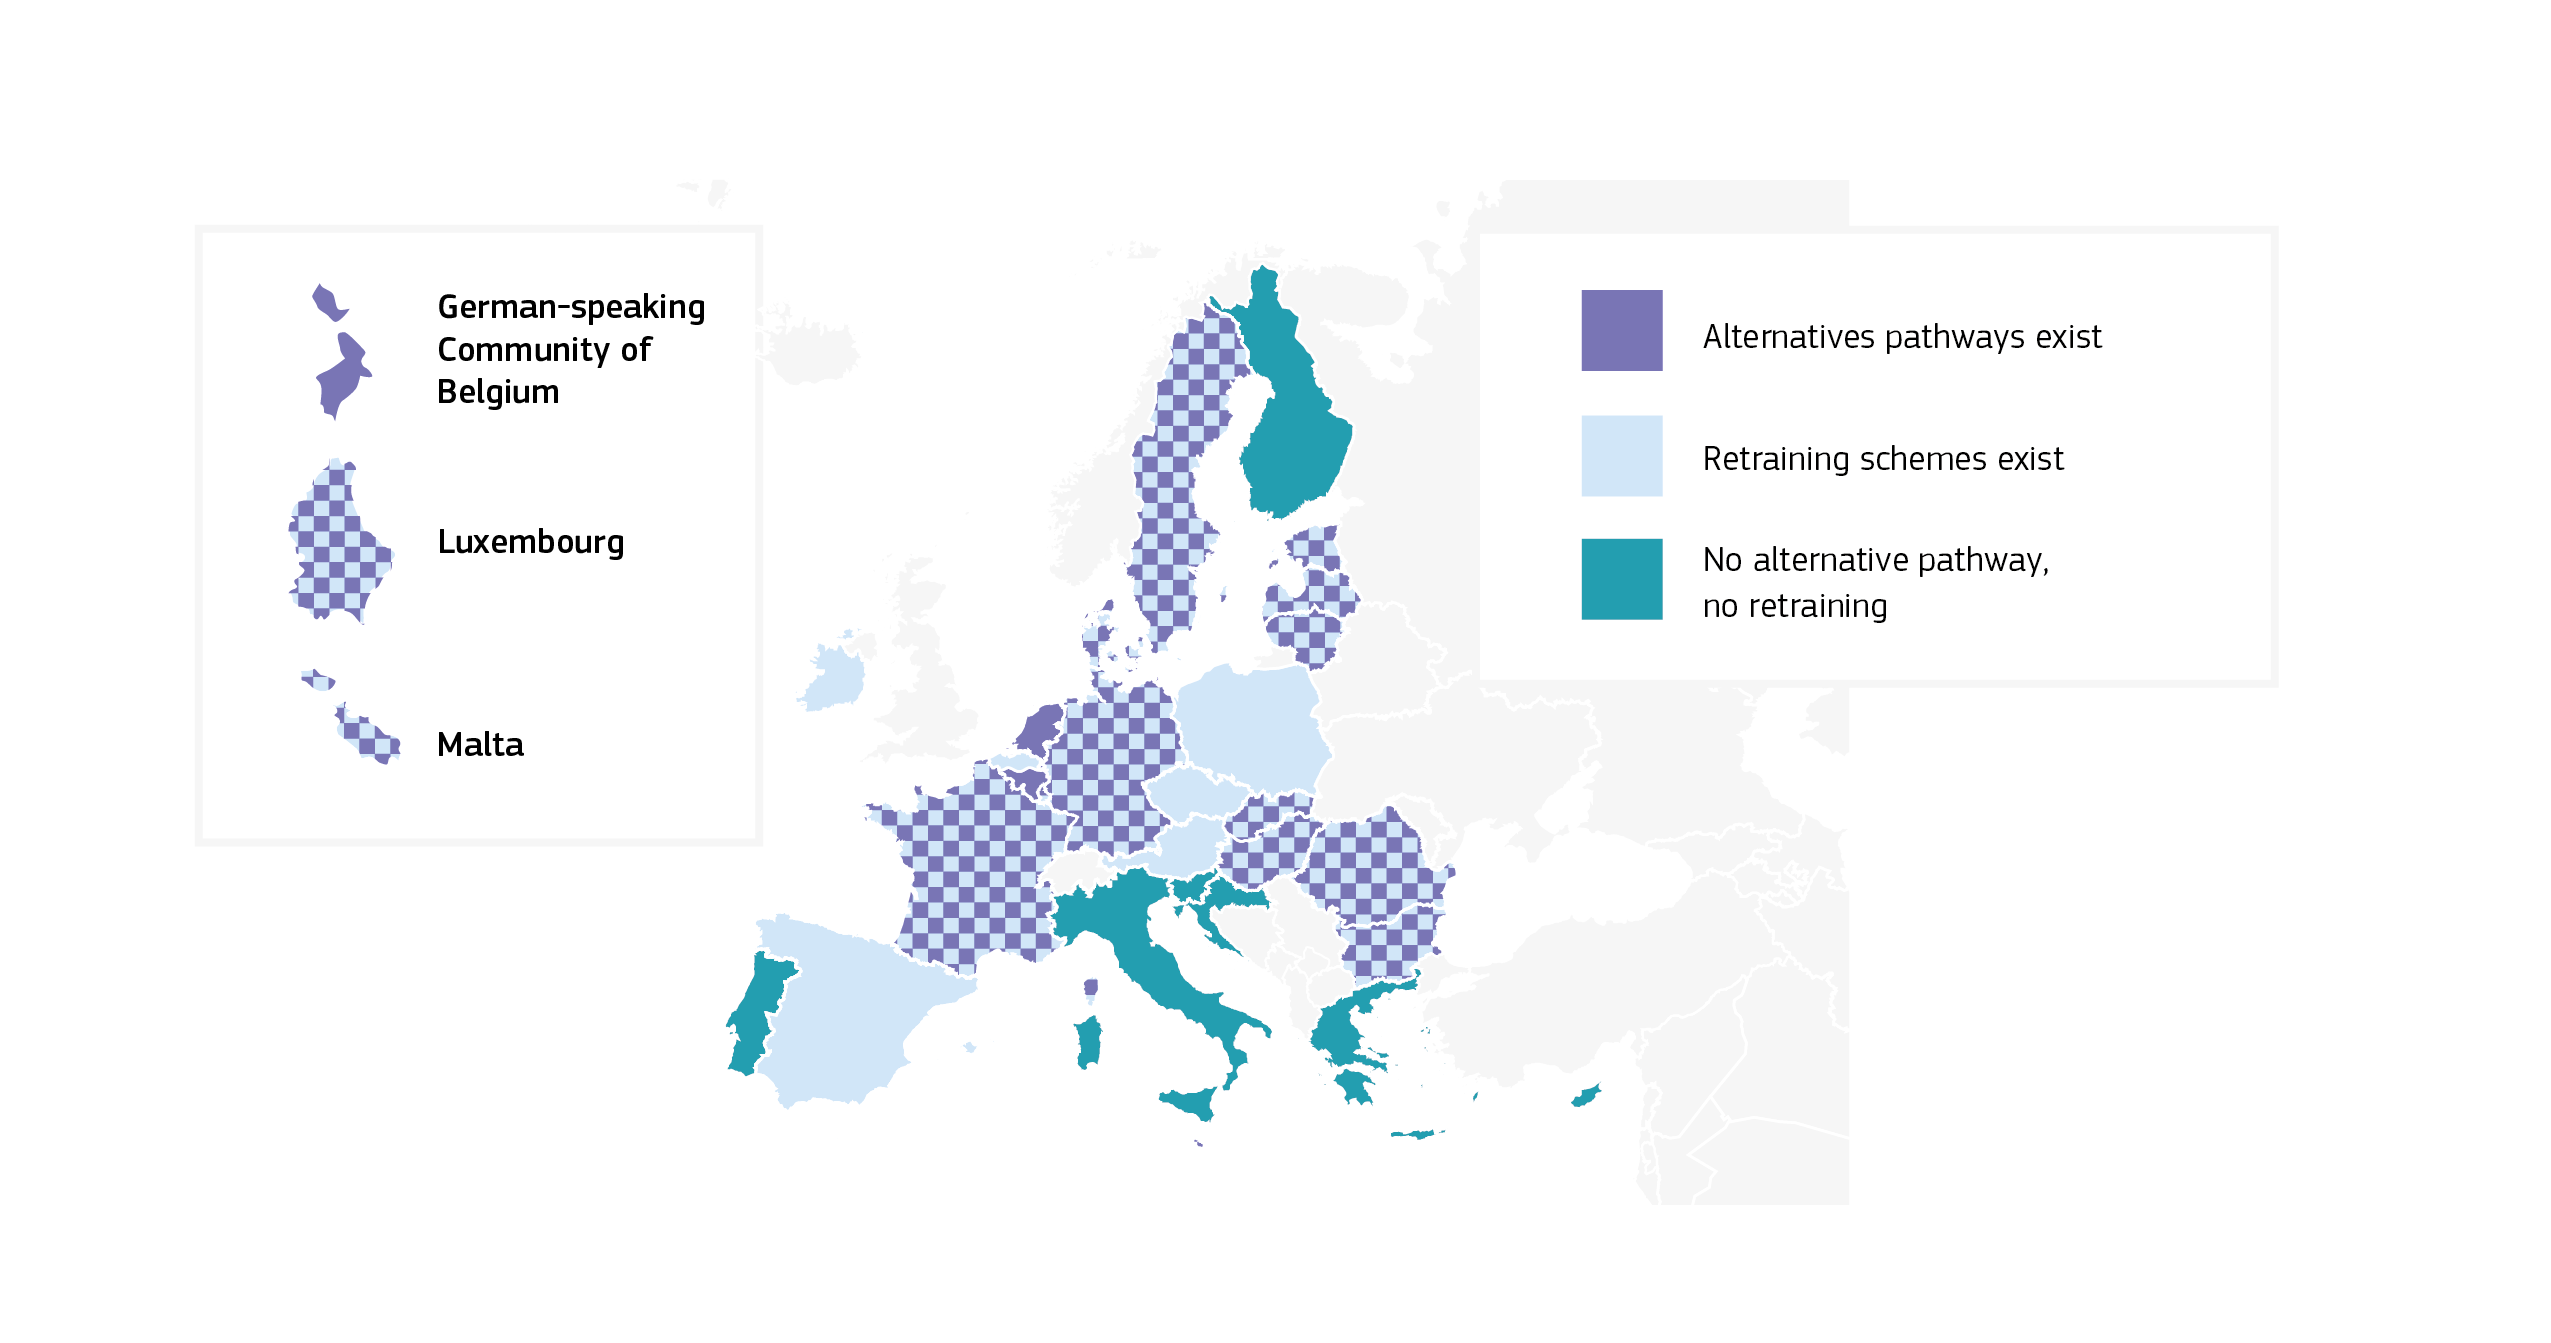 Map showing the distribution of EU education systems according to the existence of alternative pathways for informatic teachers or retraining schemes in any of the education levels between Primaray and Upper secondary (general). The existence of any (or both) options is present in a majority of EU education systems.